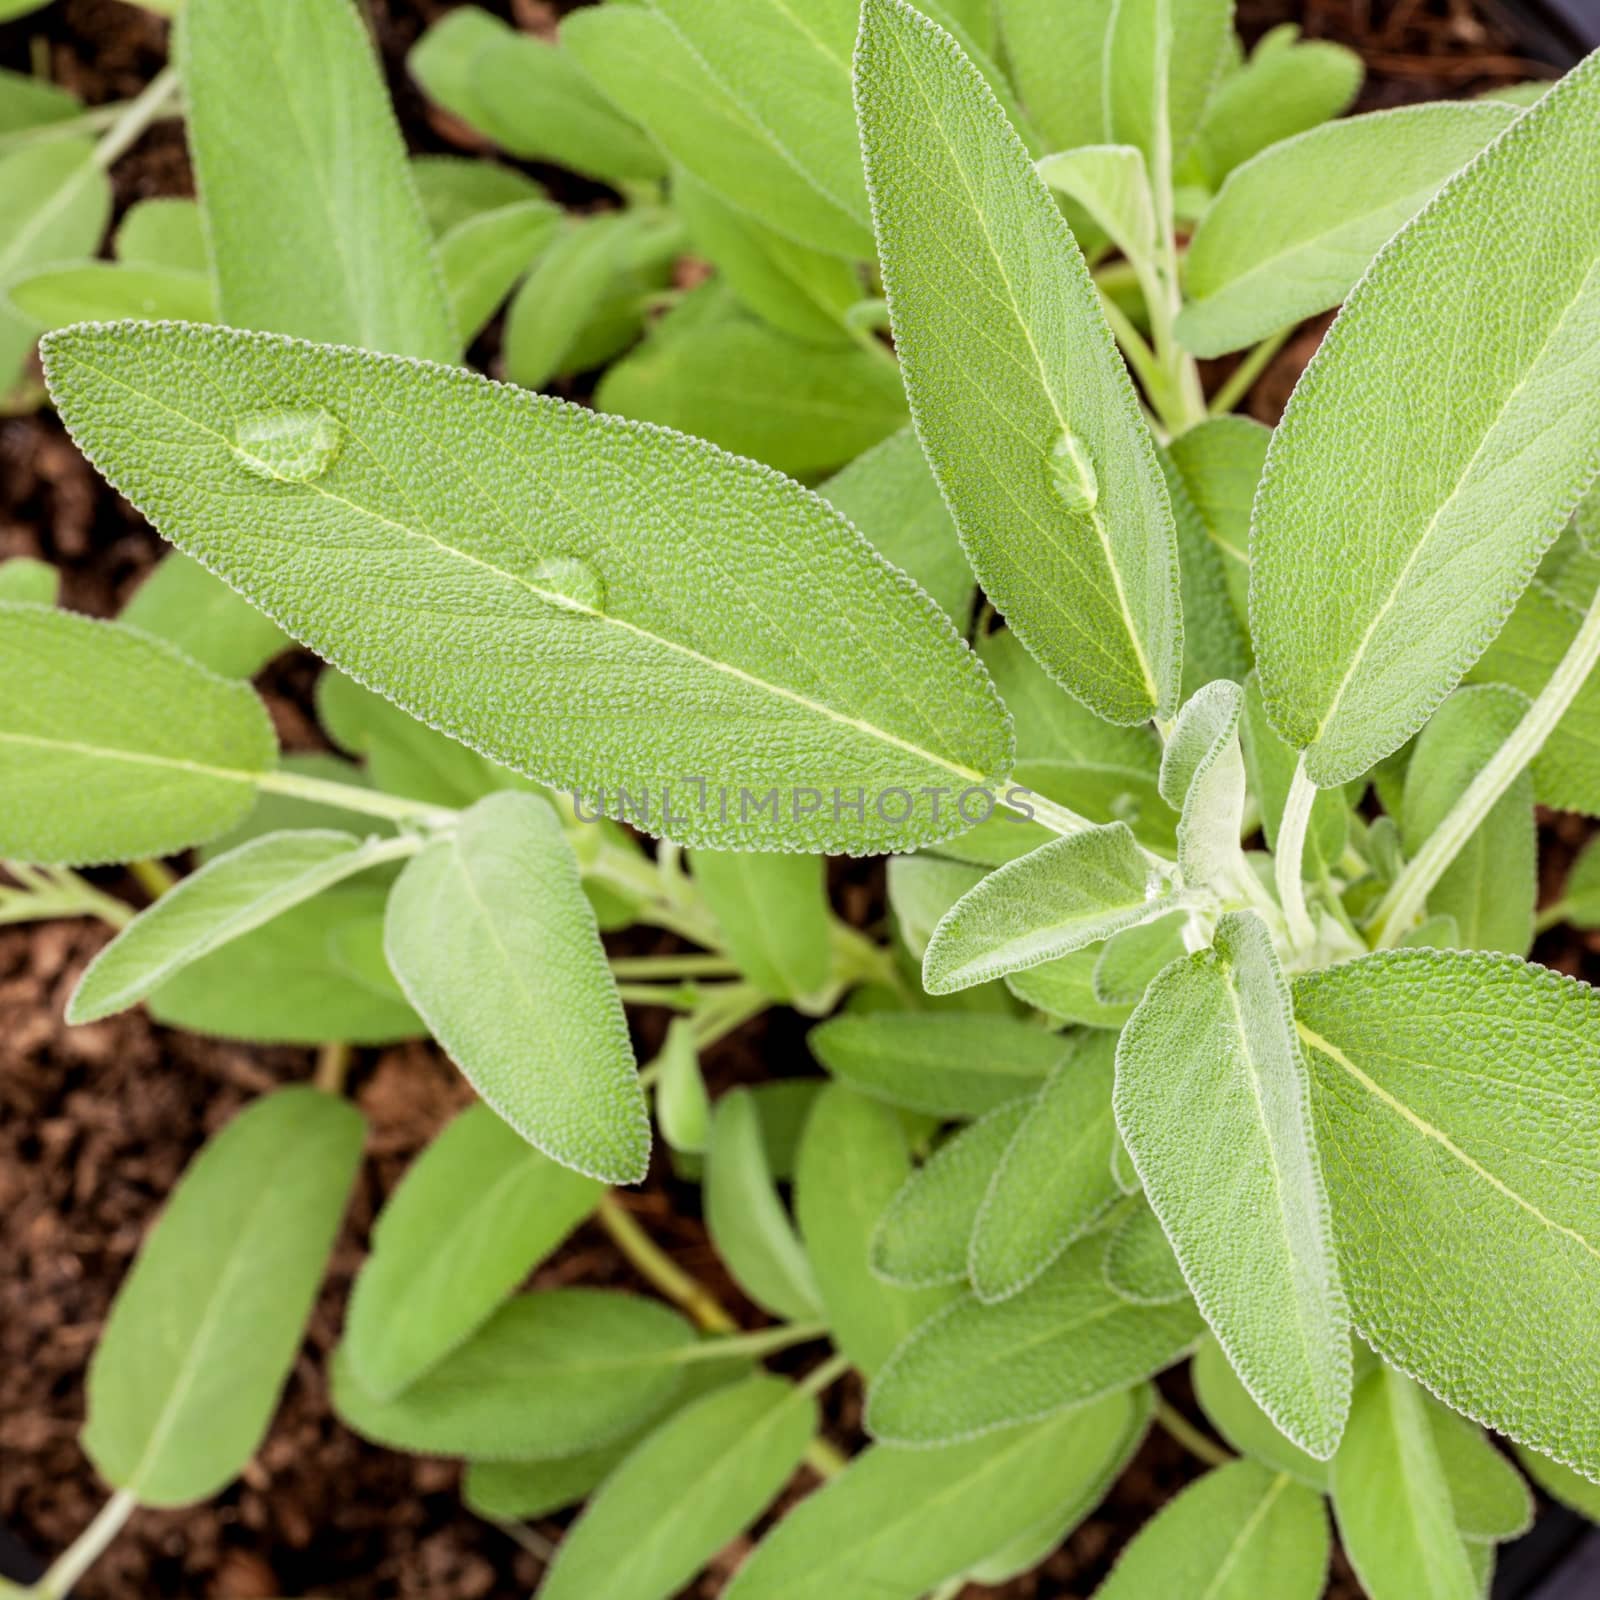 Alternative mediterranean medicinal plants Salvia officinalis or sage for medicinal and culinary use on wooden background.